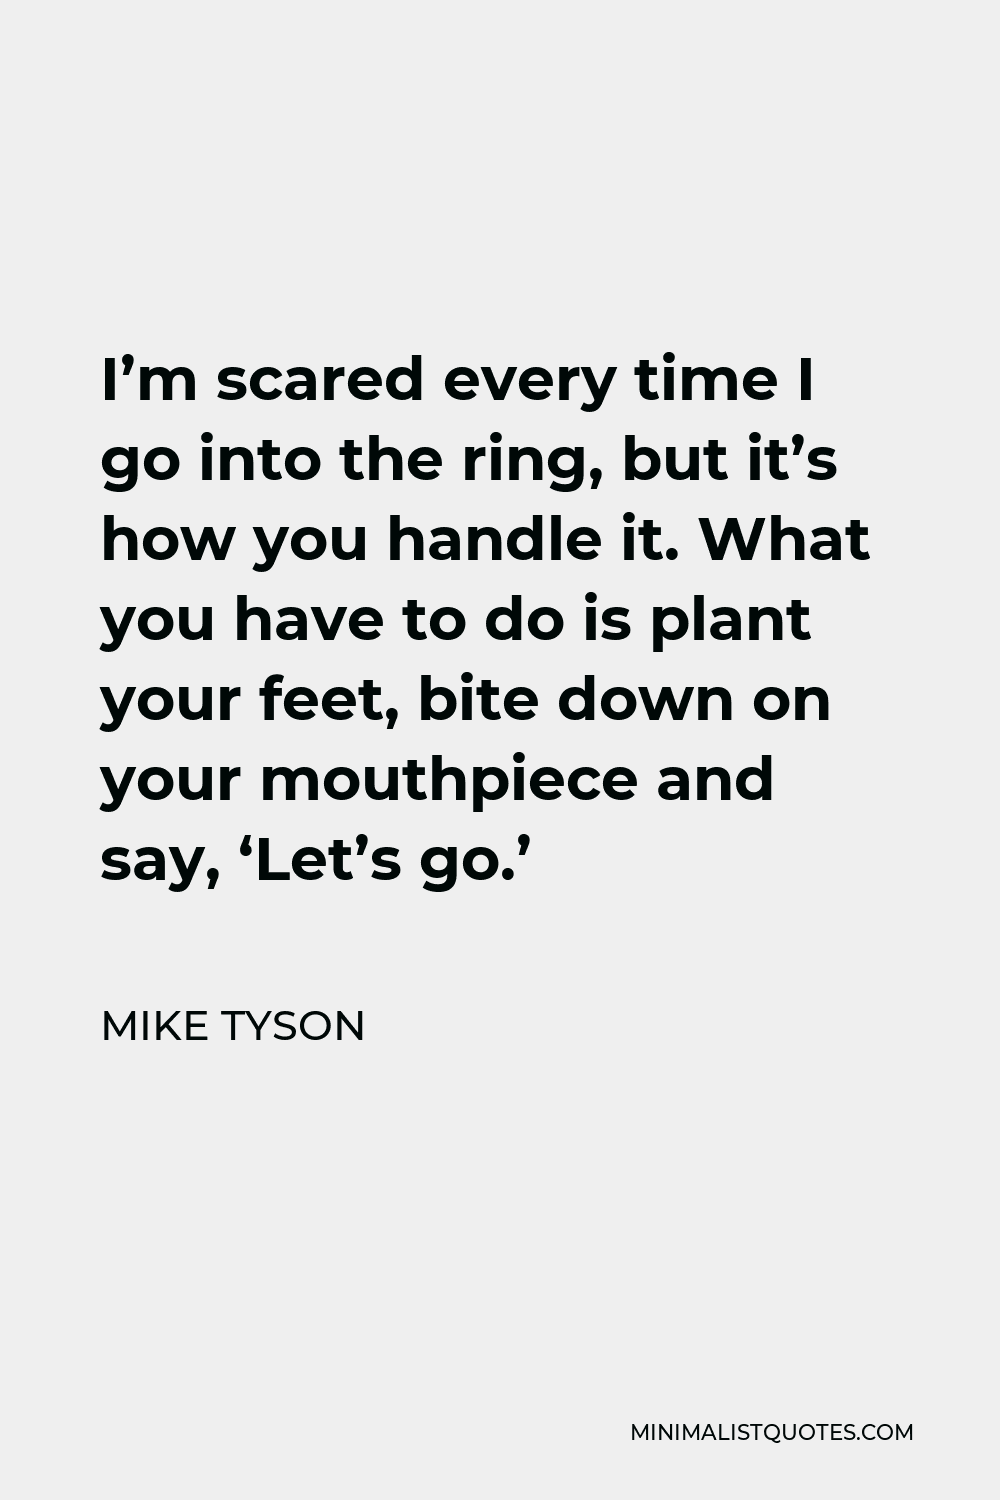 Mike Tyson Quote - I’m scared every time I go into the ring, but it’s how you handle it. What you have to do is plant your feet, bite down on your mouthpiece and say, ‘Let’s go.’